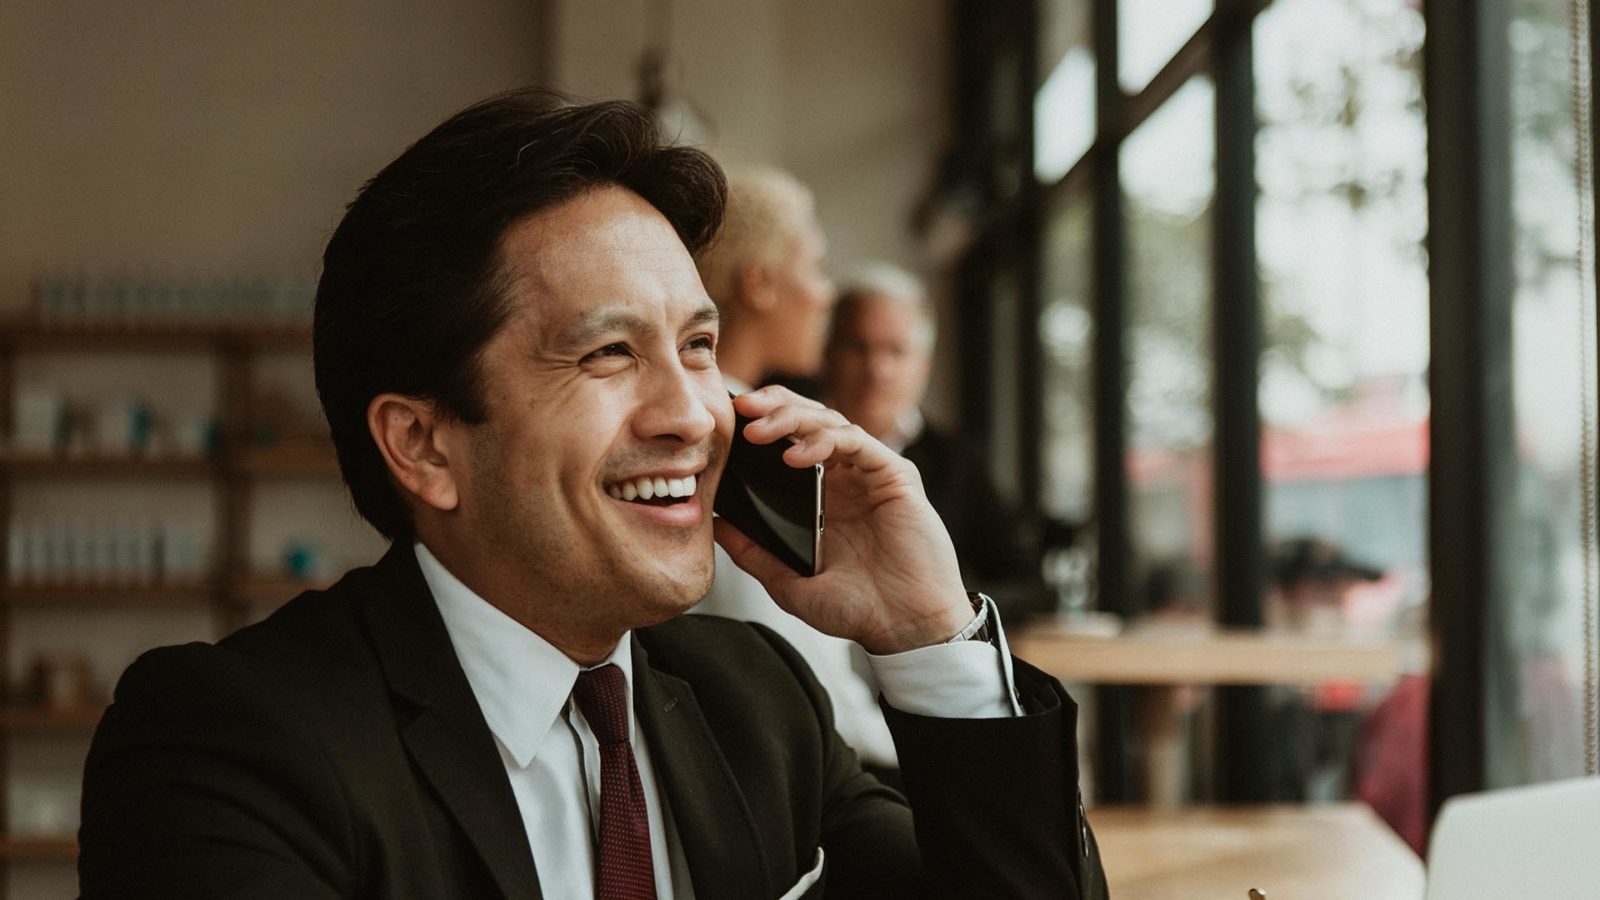 business man talking on a phone